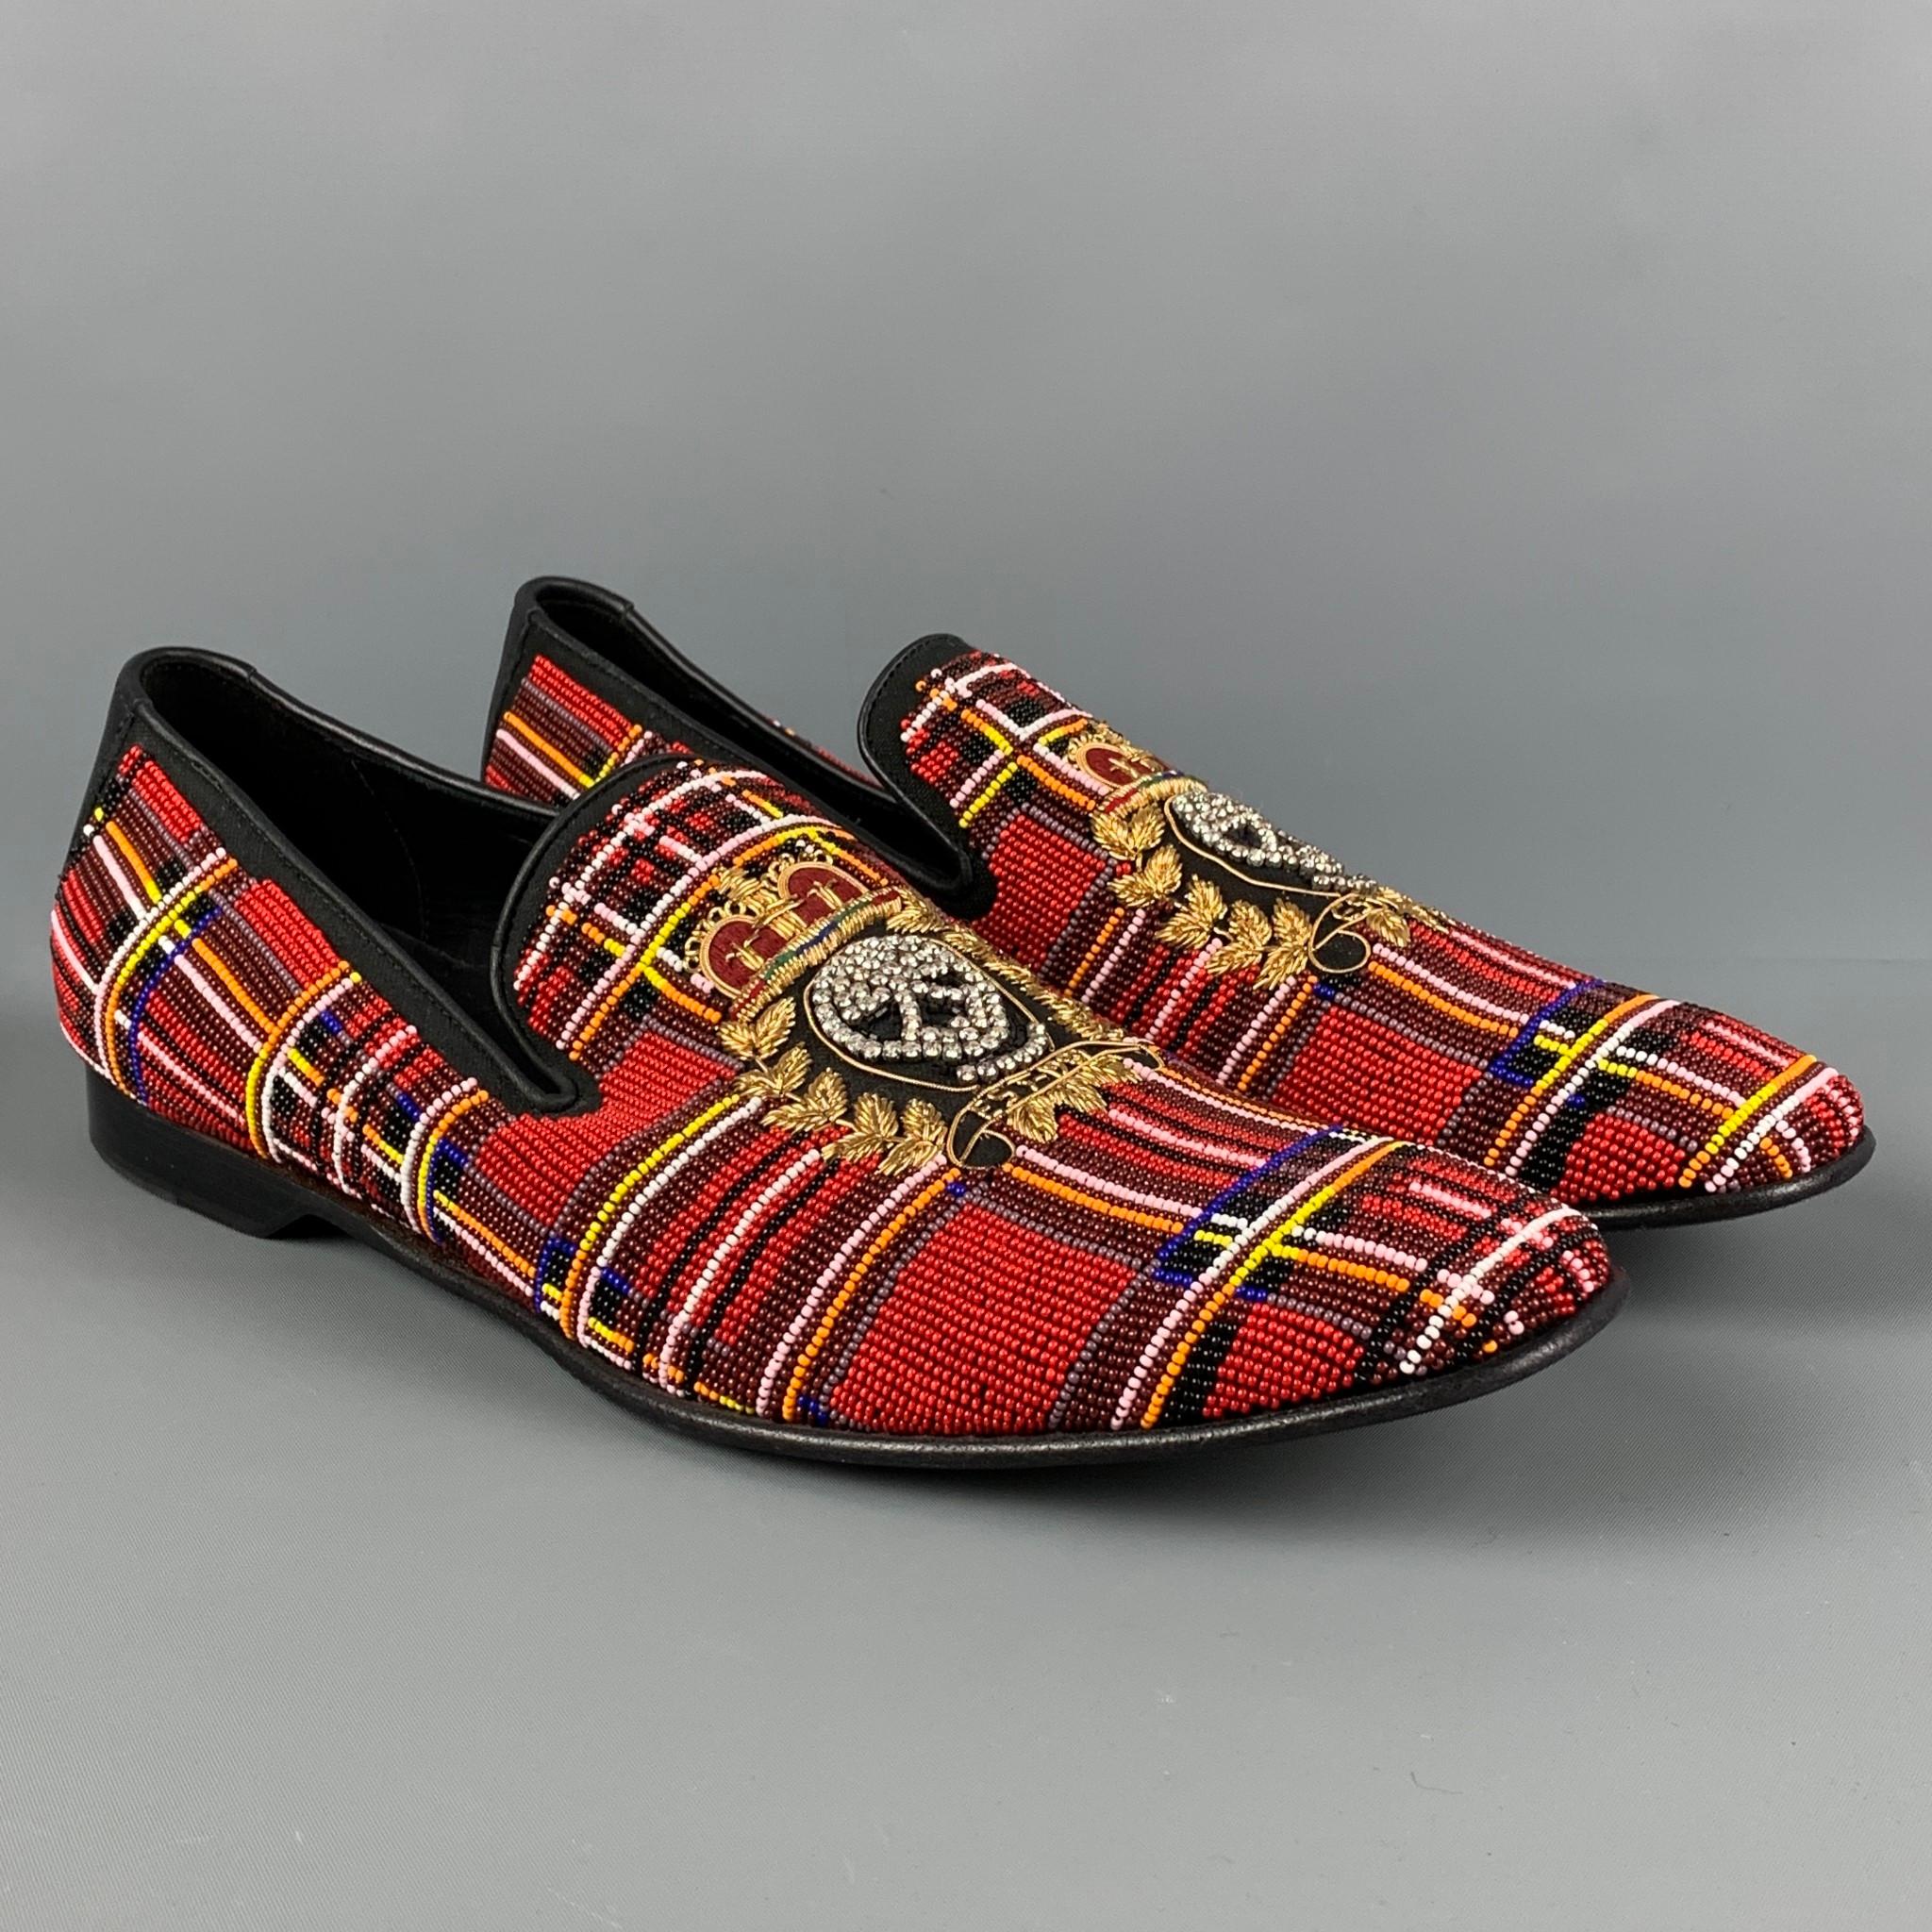 DONALD J PLINER loafers comes in a multi-color beaded material featuring a 'Royal Skull Crest'  design, slip on, and a square toe. Made in Italy. 

Very Good Pre-Owned Condition.
Marked: 12 M

Outsole: 12.75 in. x 4.25 in. 